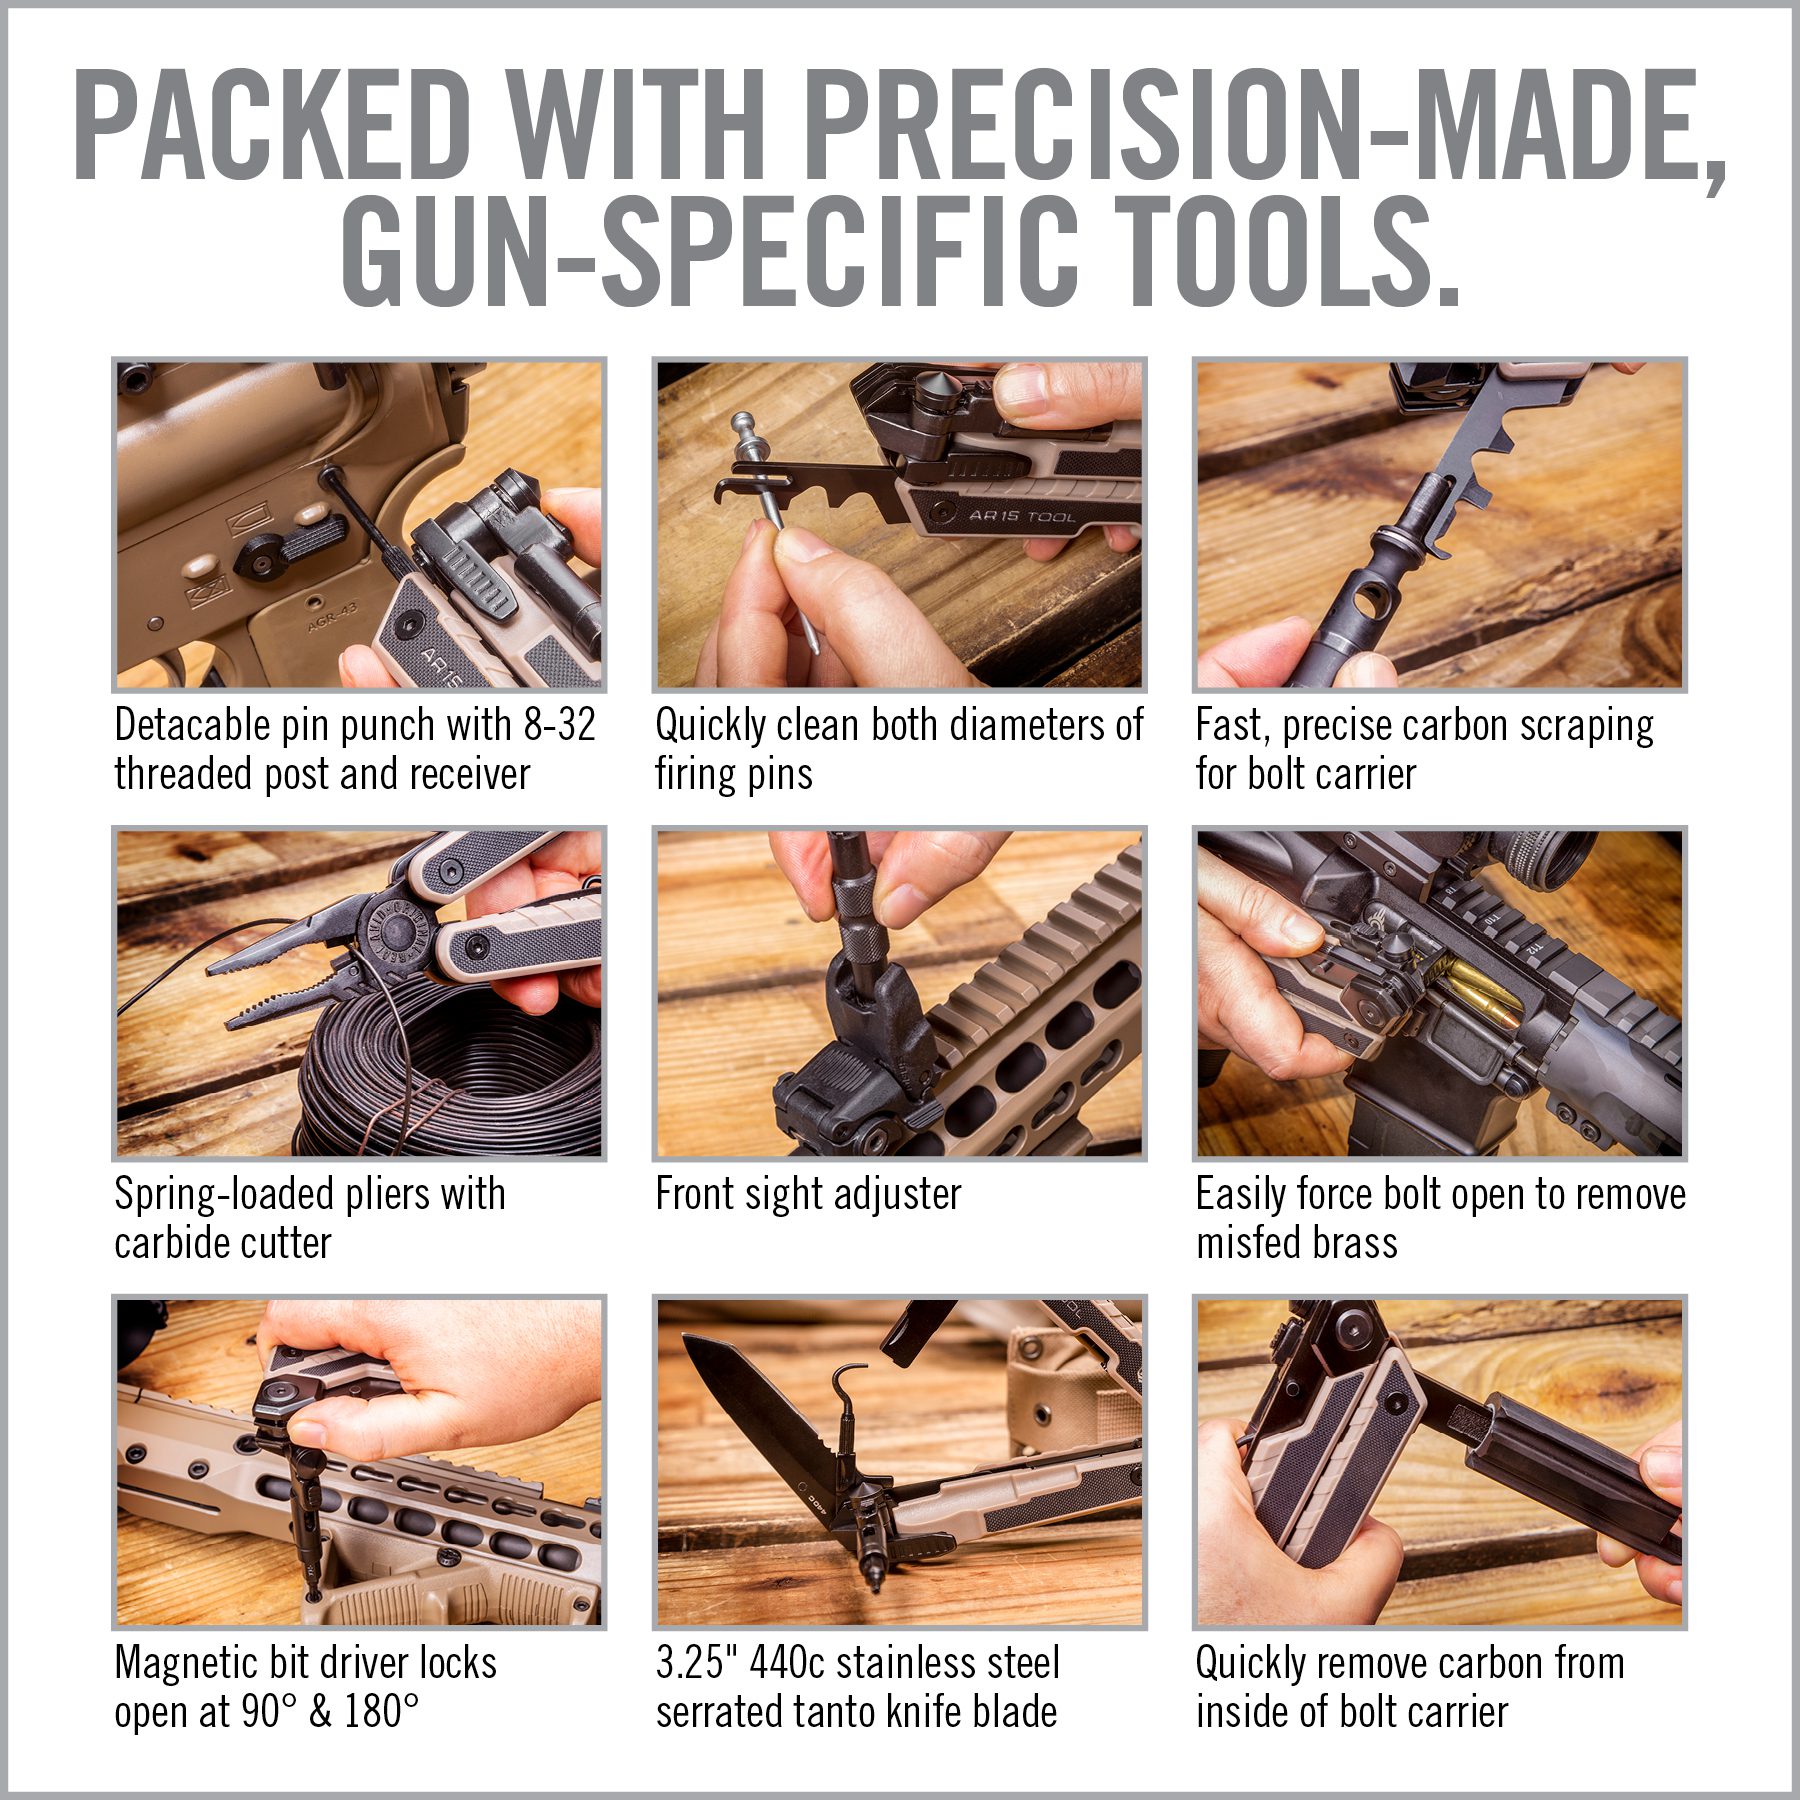 the instructions for how to make a gun - specific tool